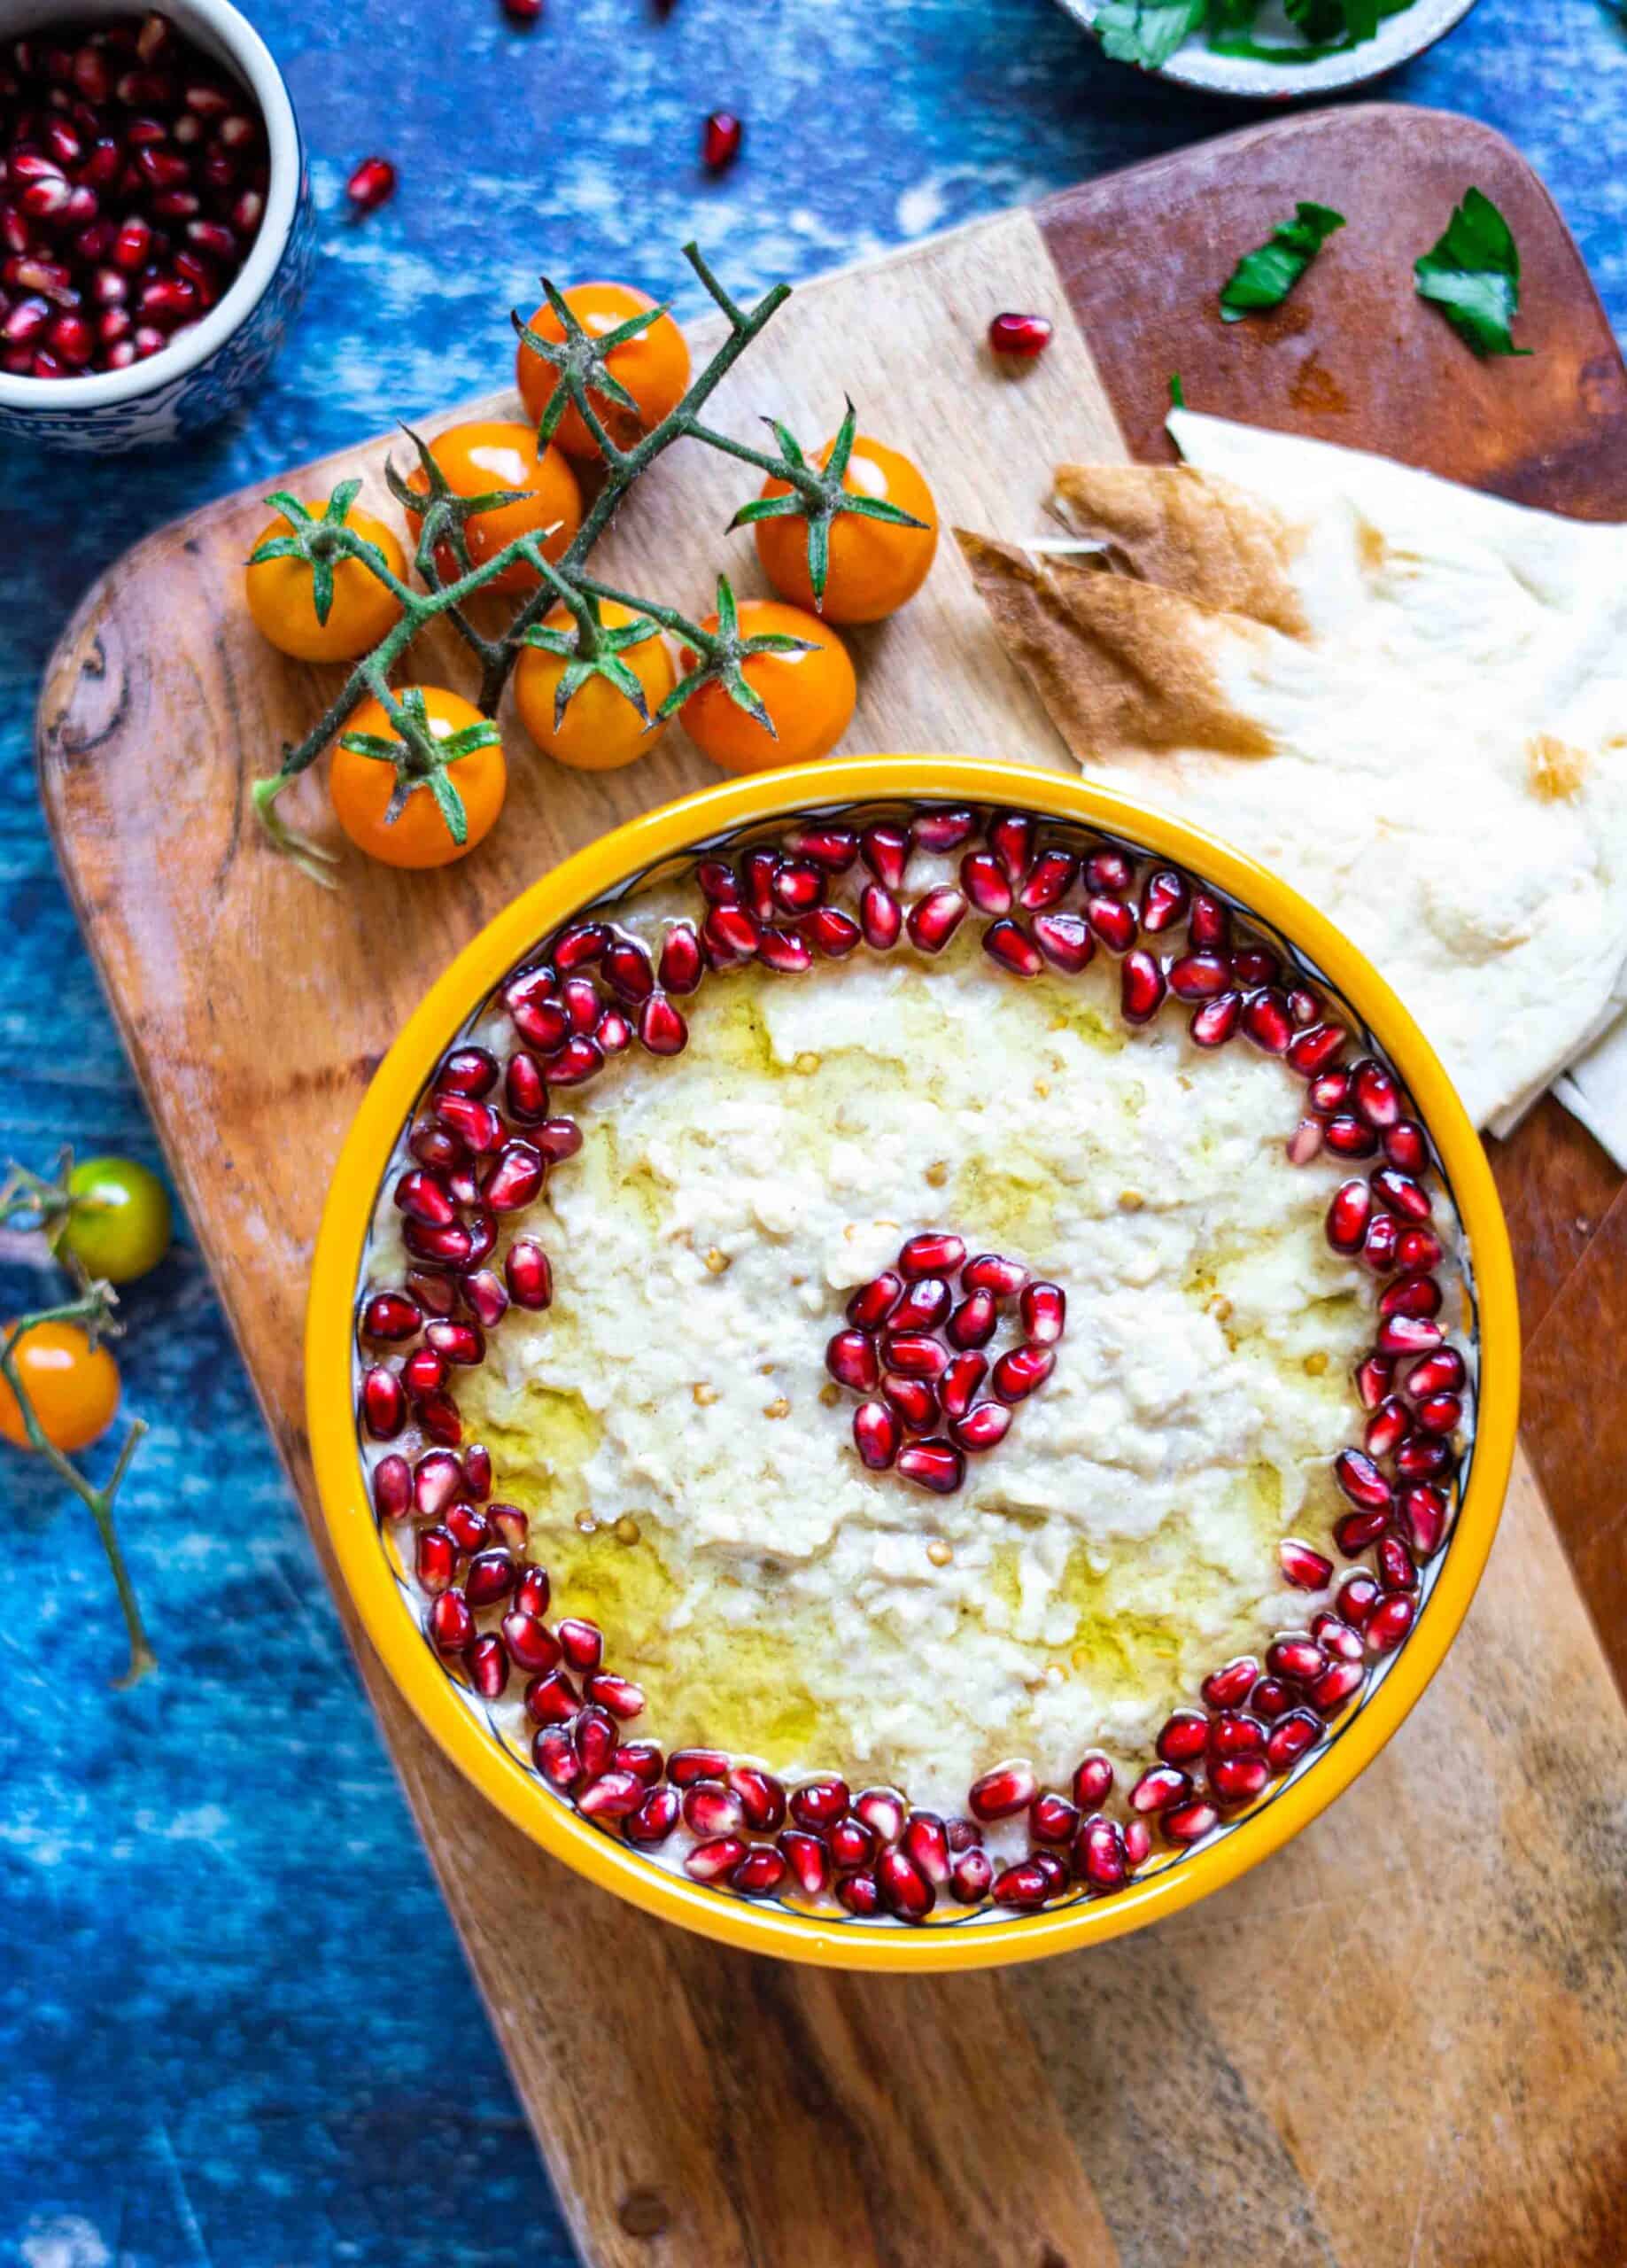 mutabal on plate decorated with pomegranate seeds and extra virgin olive oil, next to bread and grapes tomatoes.